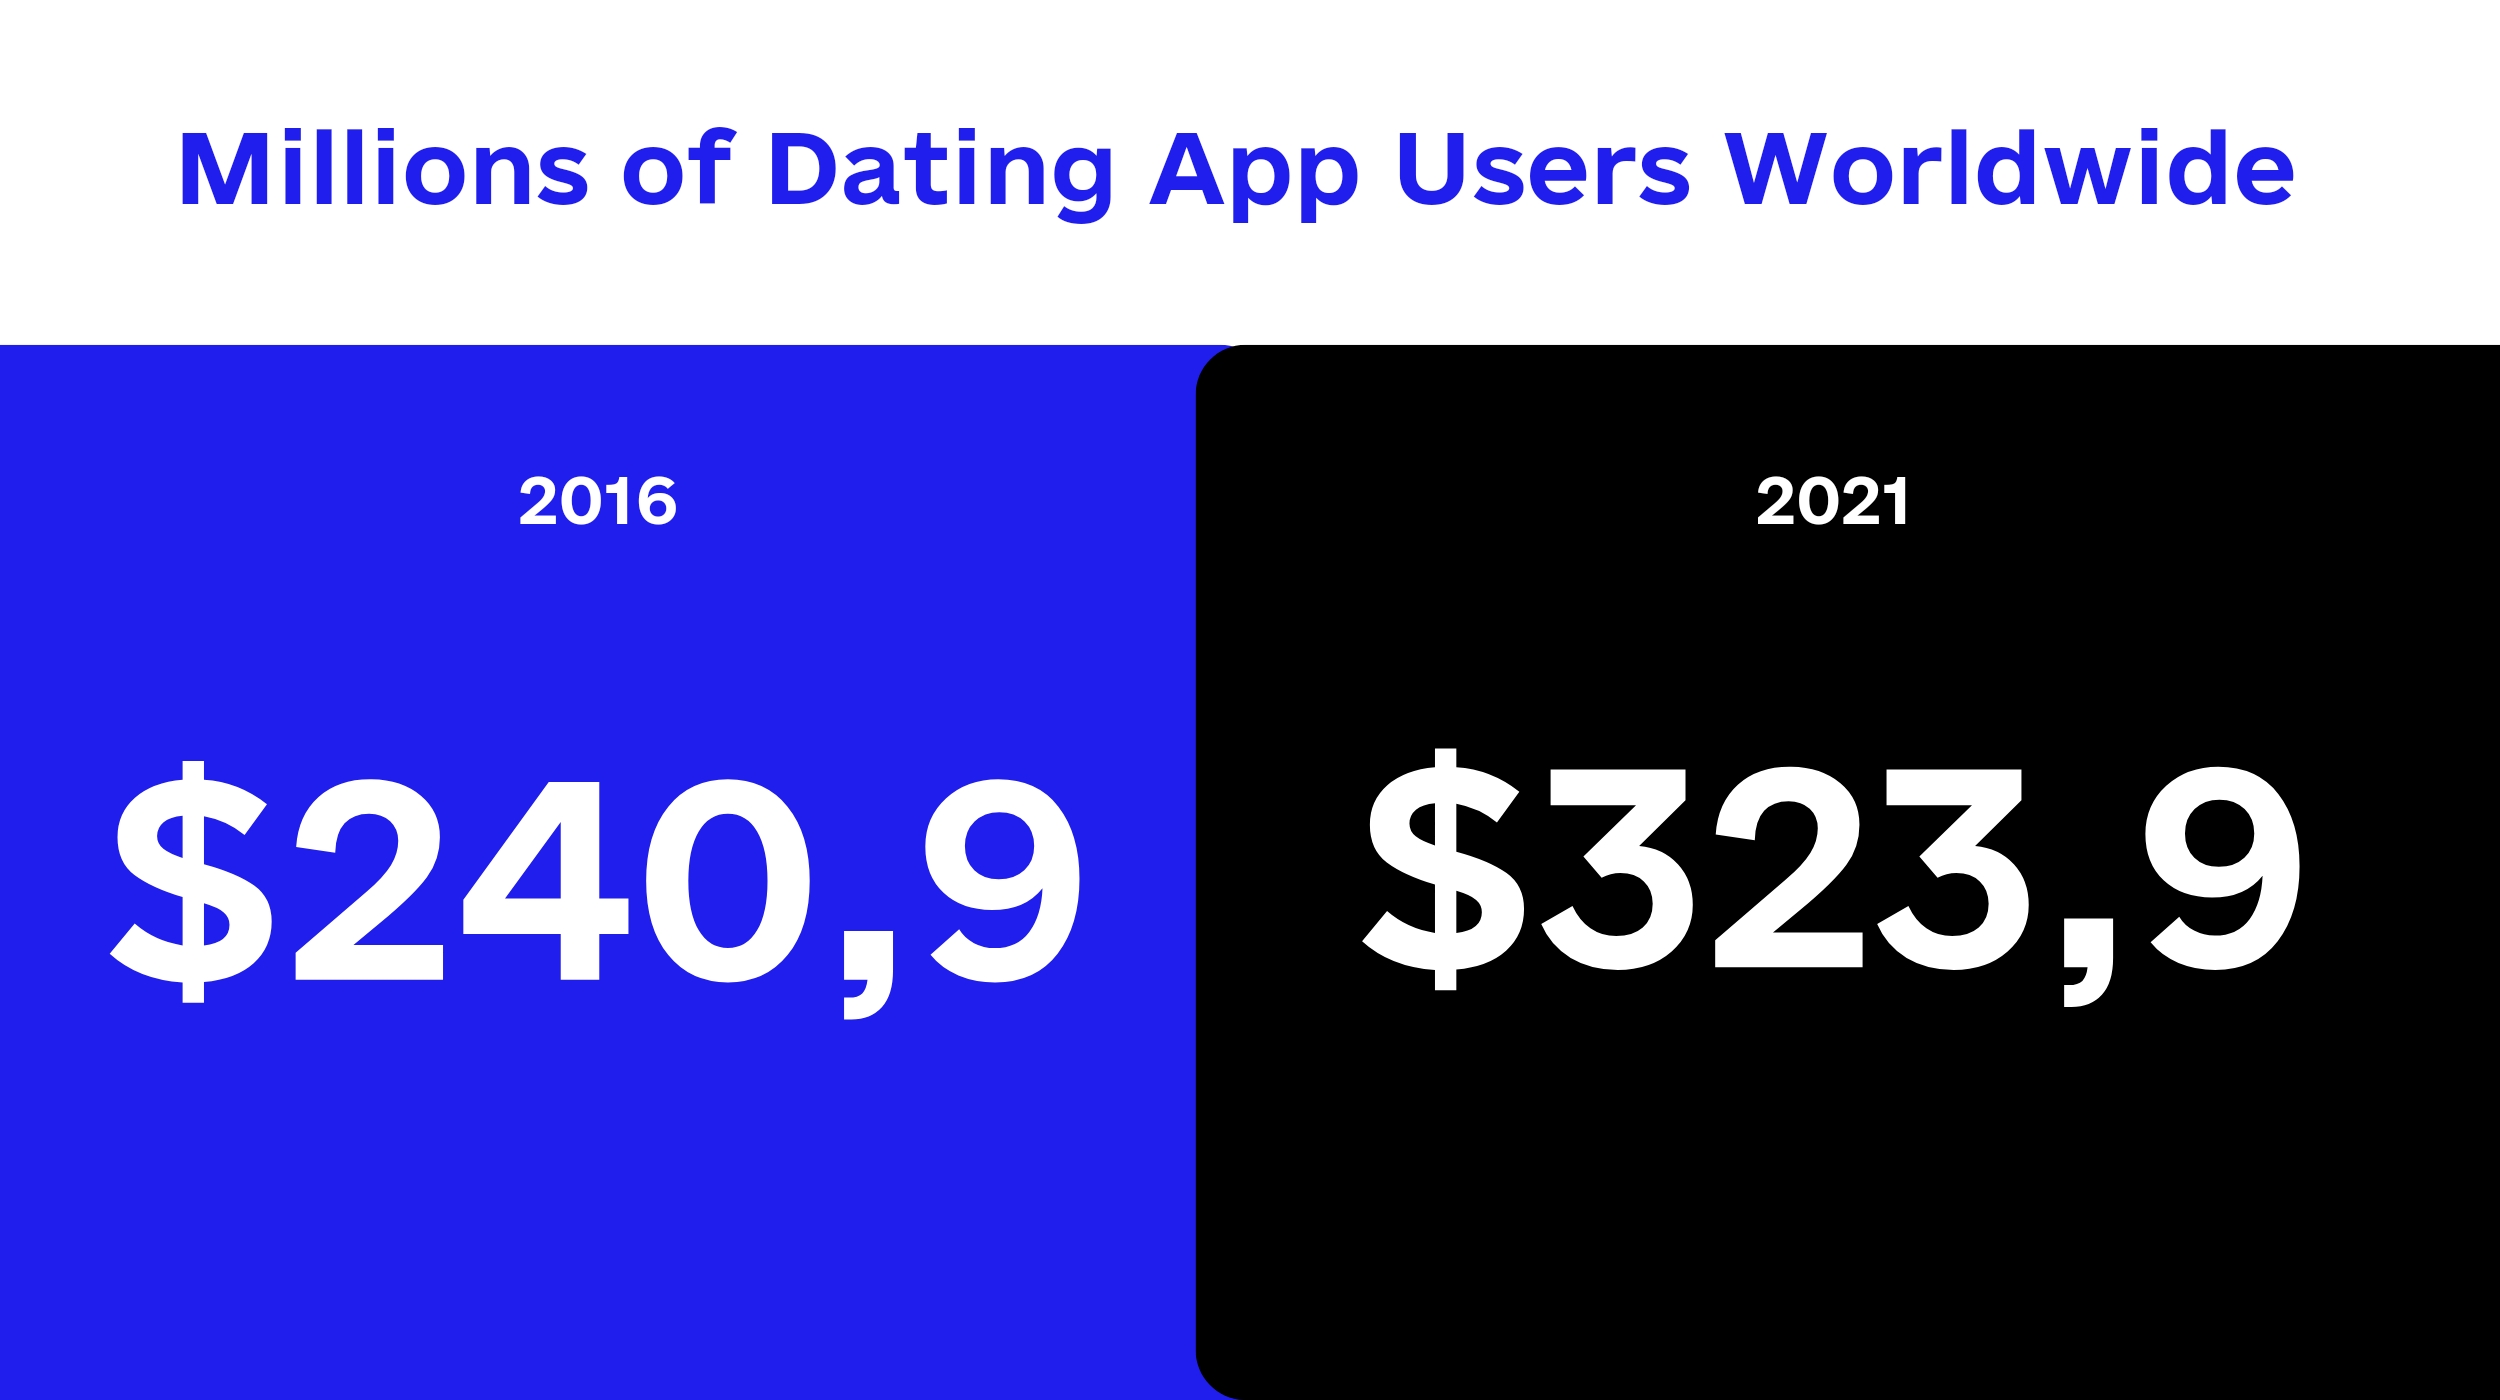 Dating apps users